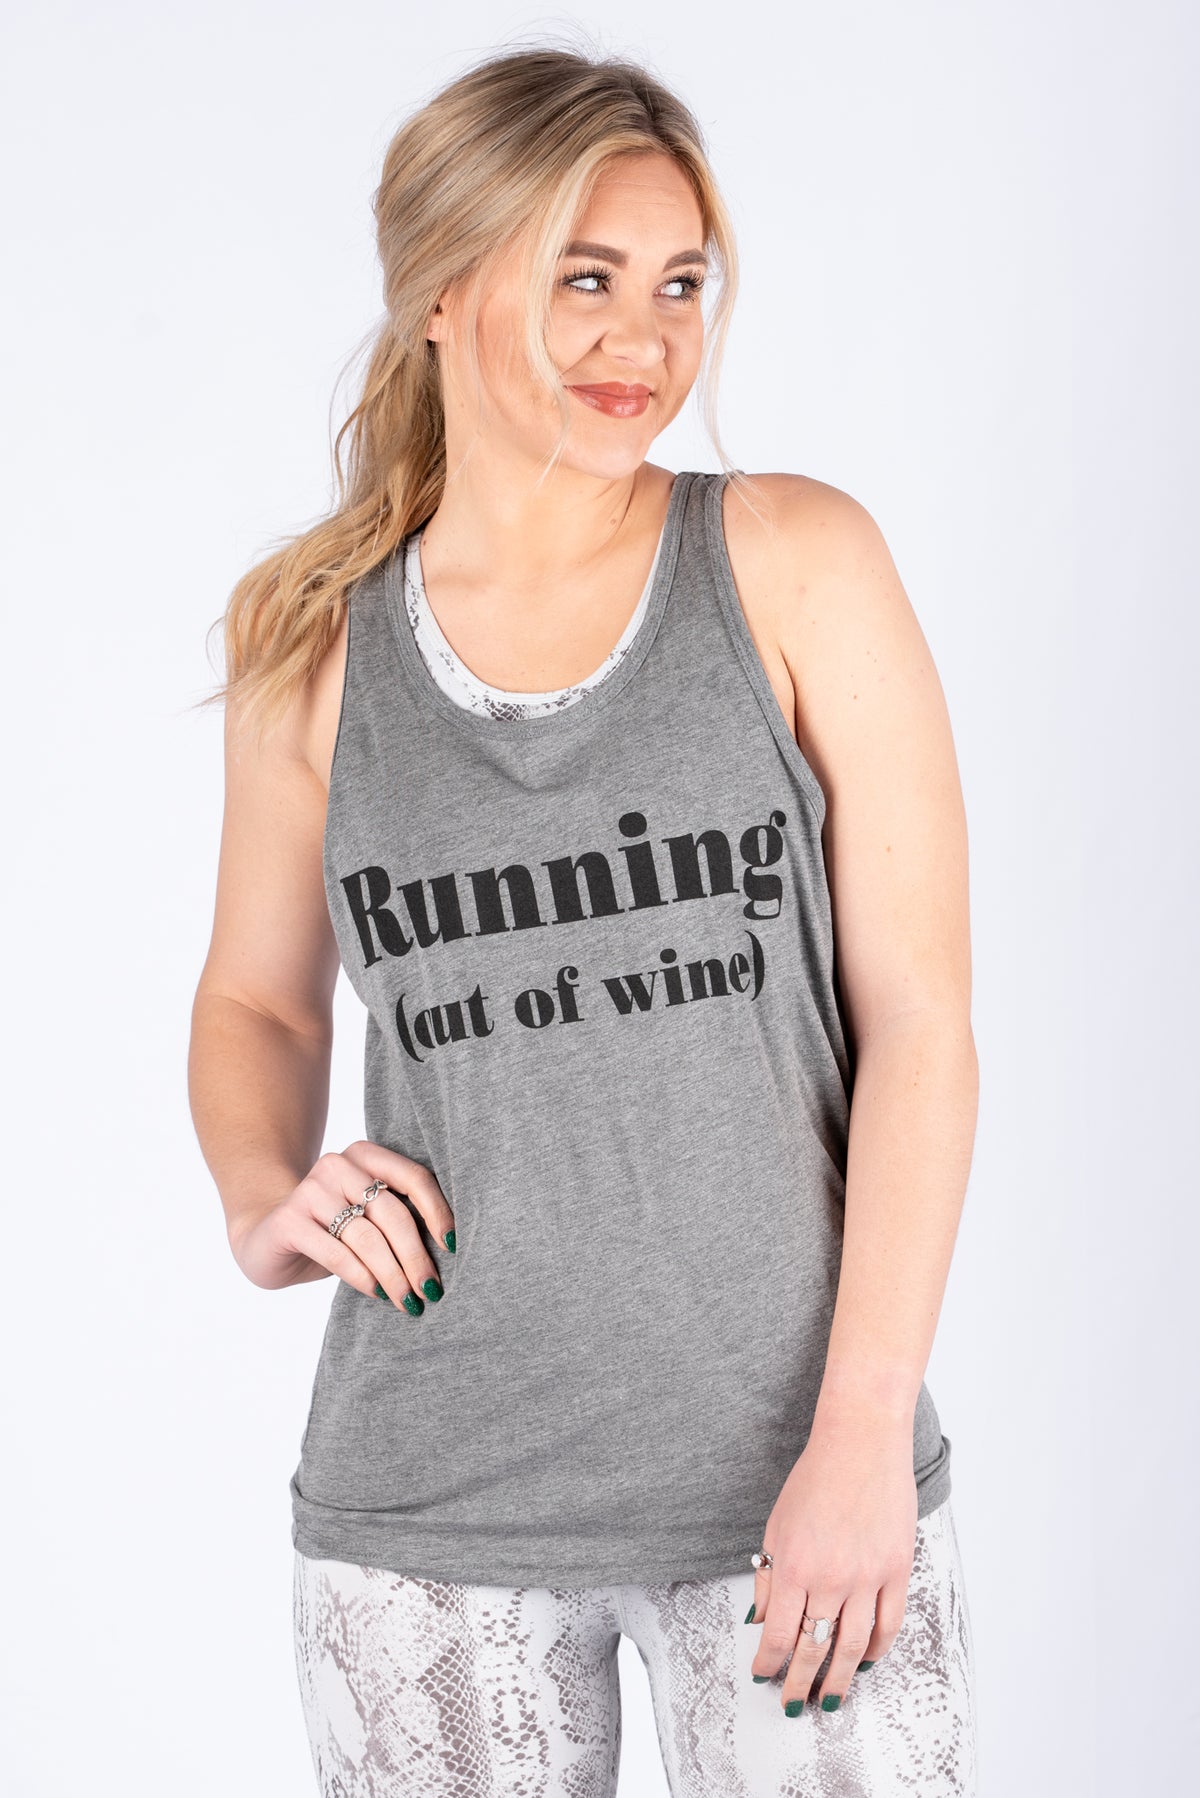 Running out of wine unisex tank top heather grey - Stylish Tank Top - Trendy Graphic T-Shirts and Tank Tops at Lush Fashion Lounge Boutique in Oklahoma City